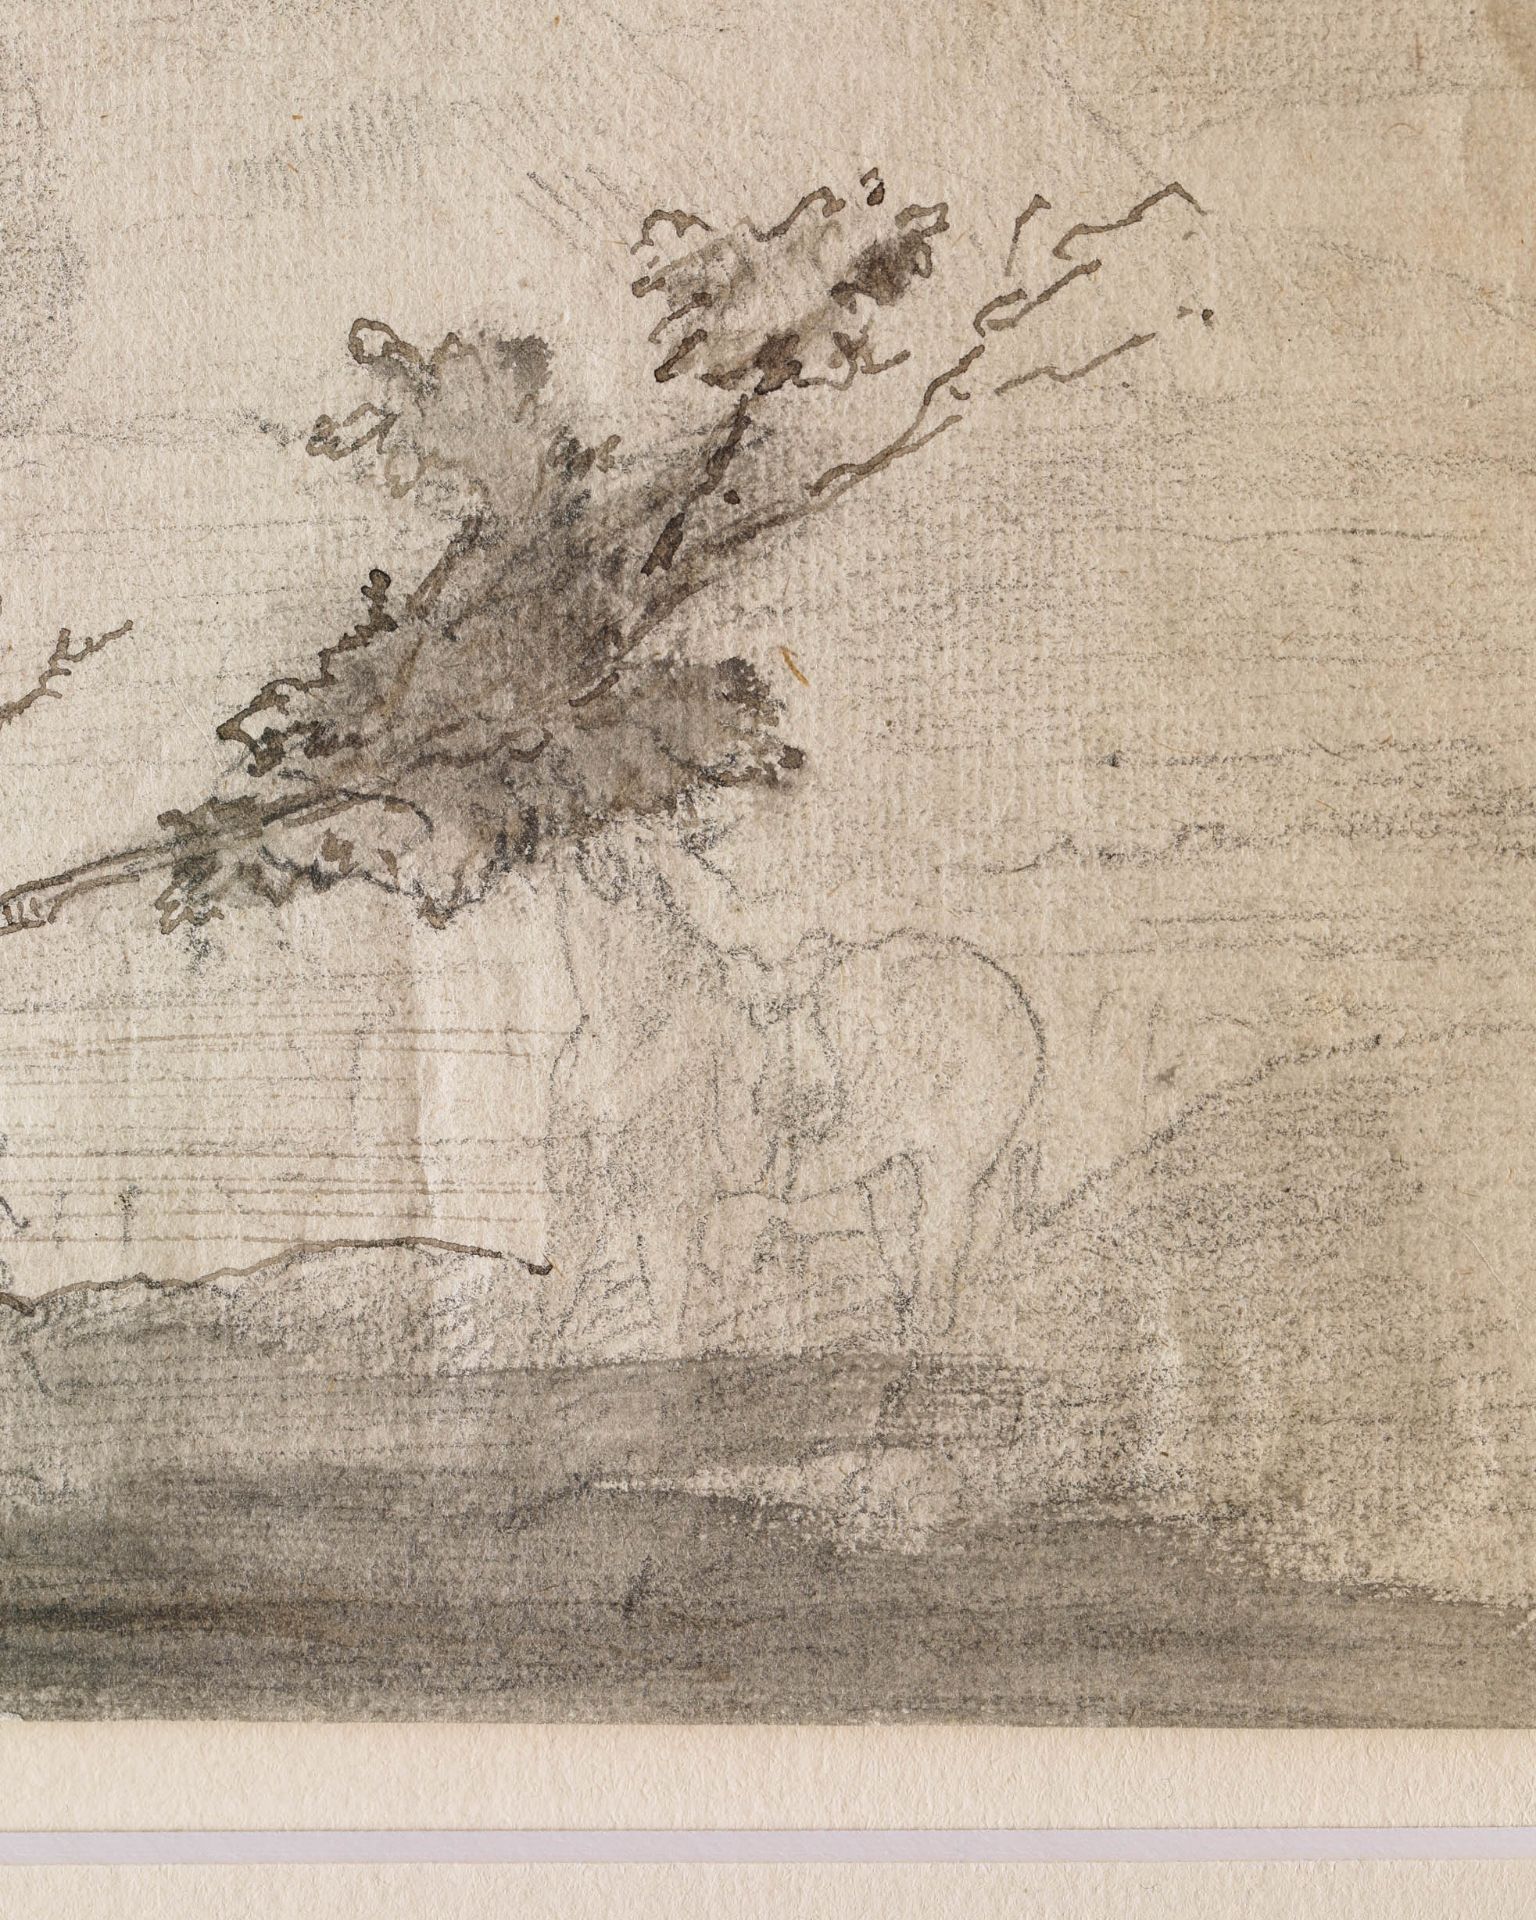 Edgar Degas, Drawing + Certificate, landscape with leaning tree - Image 4 of 4